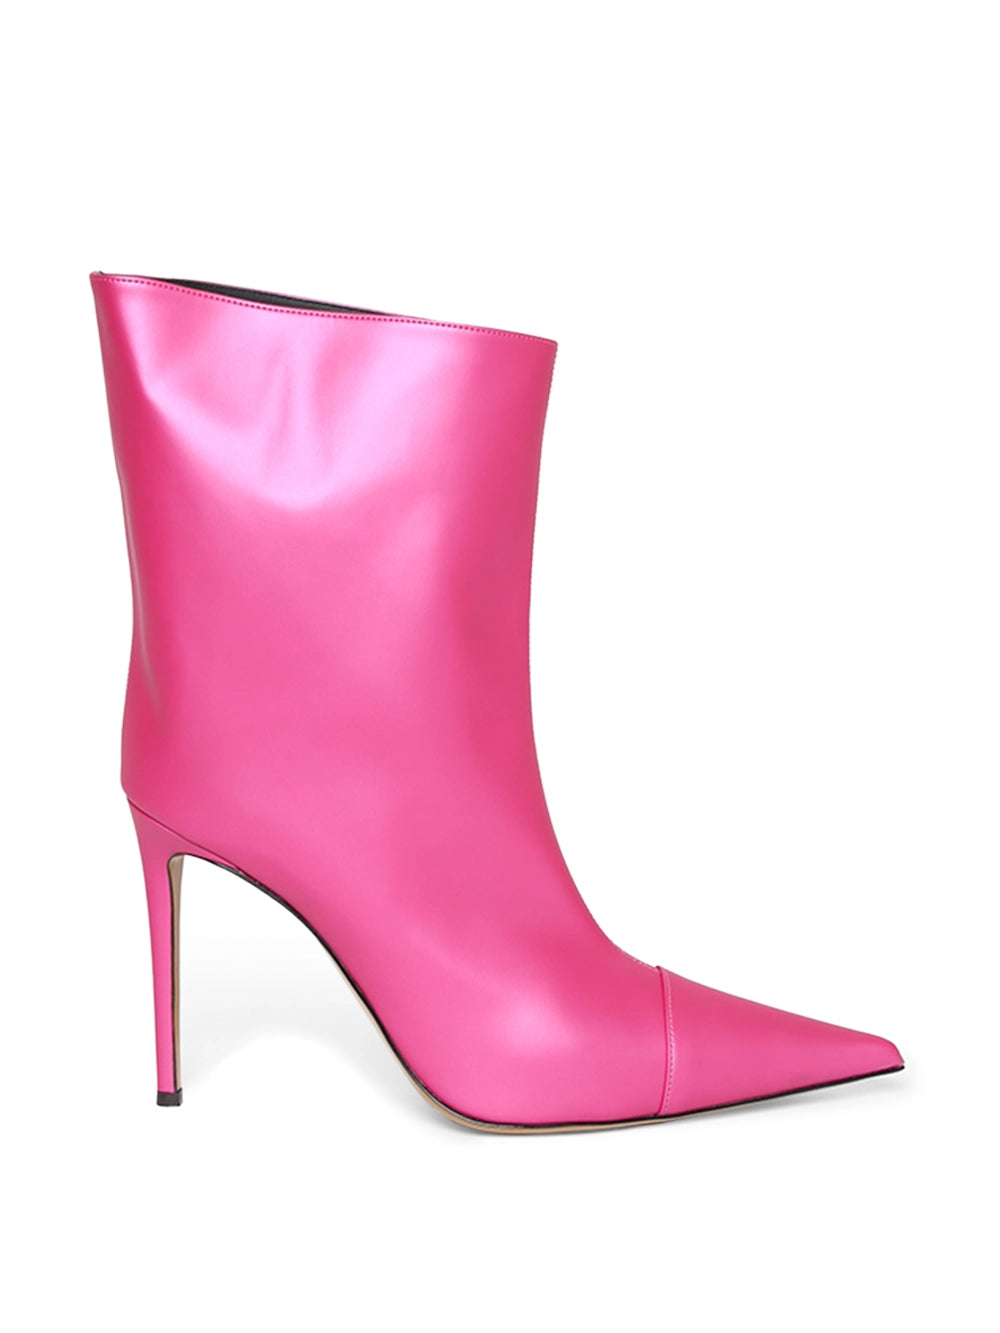 ALEXANDRE VAUTHIER SATY FUXIA ANKLE BOOT